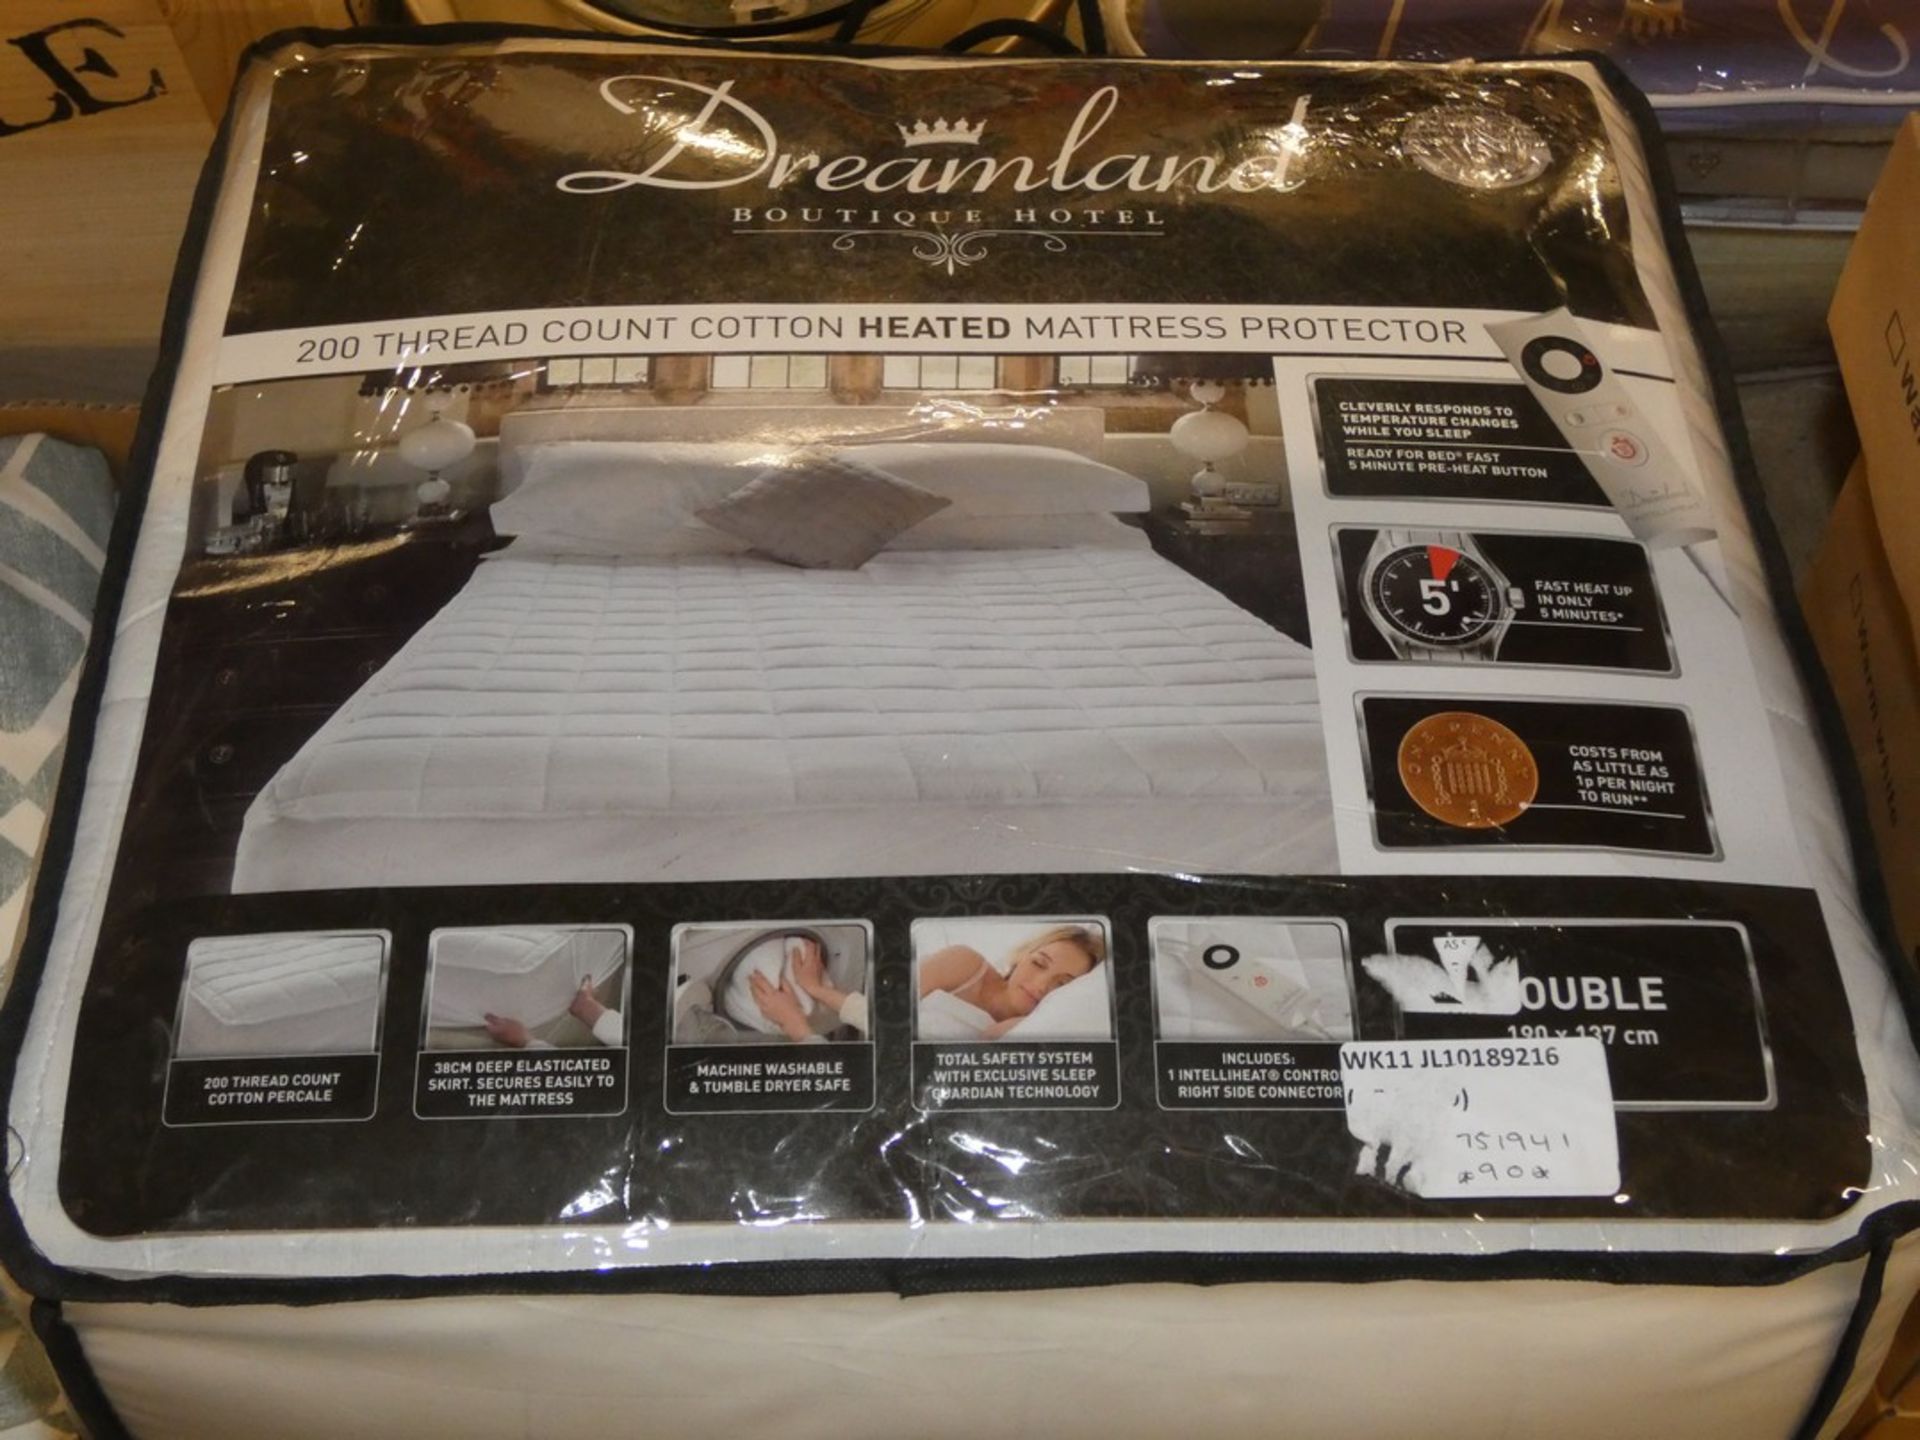 Lot to Contain 2 Assorted Dreamland 200 Thread Count Cotton Heated Mattress Protectors